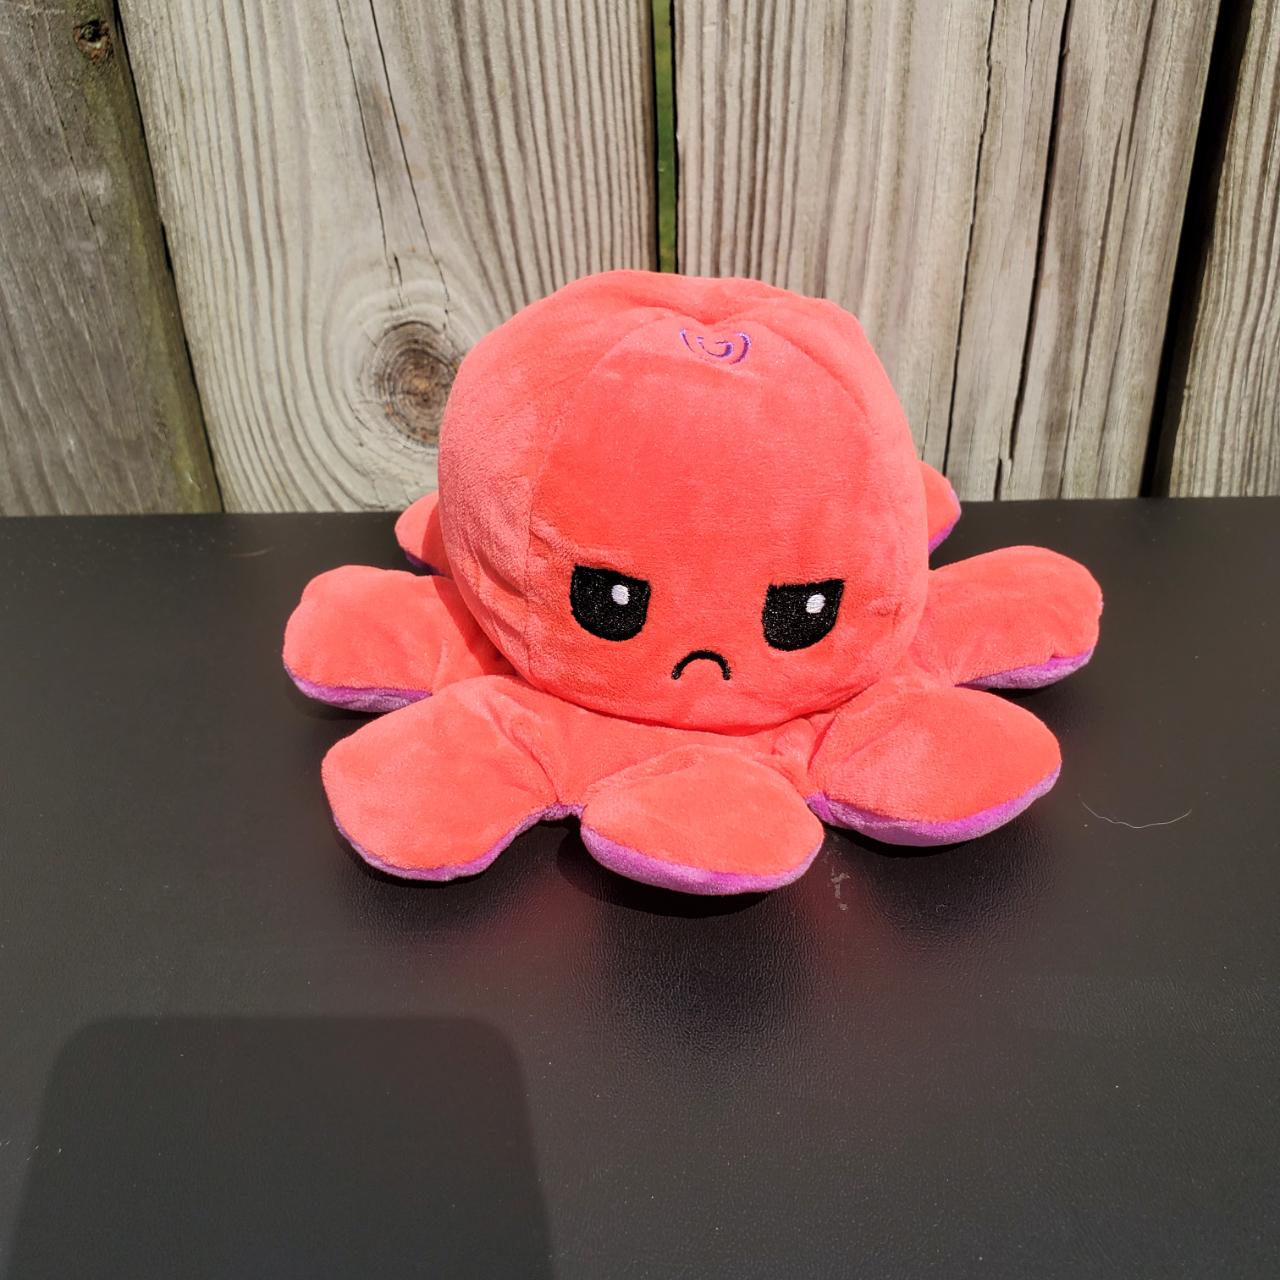 Product Image 3 - PURPLE & RED REVERSIBLE OCTOPUS!